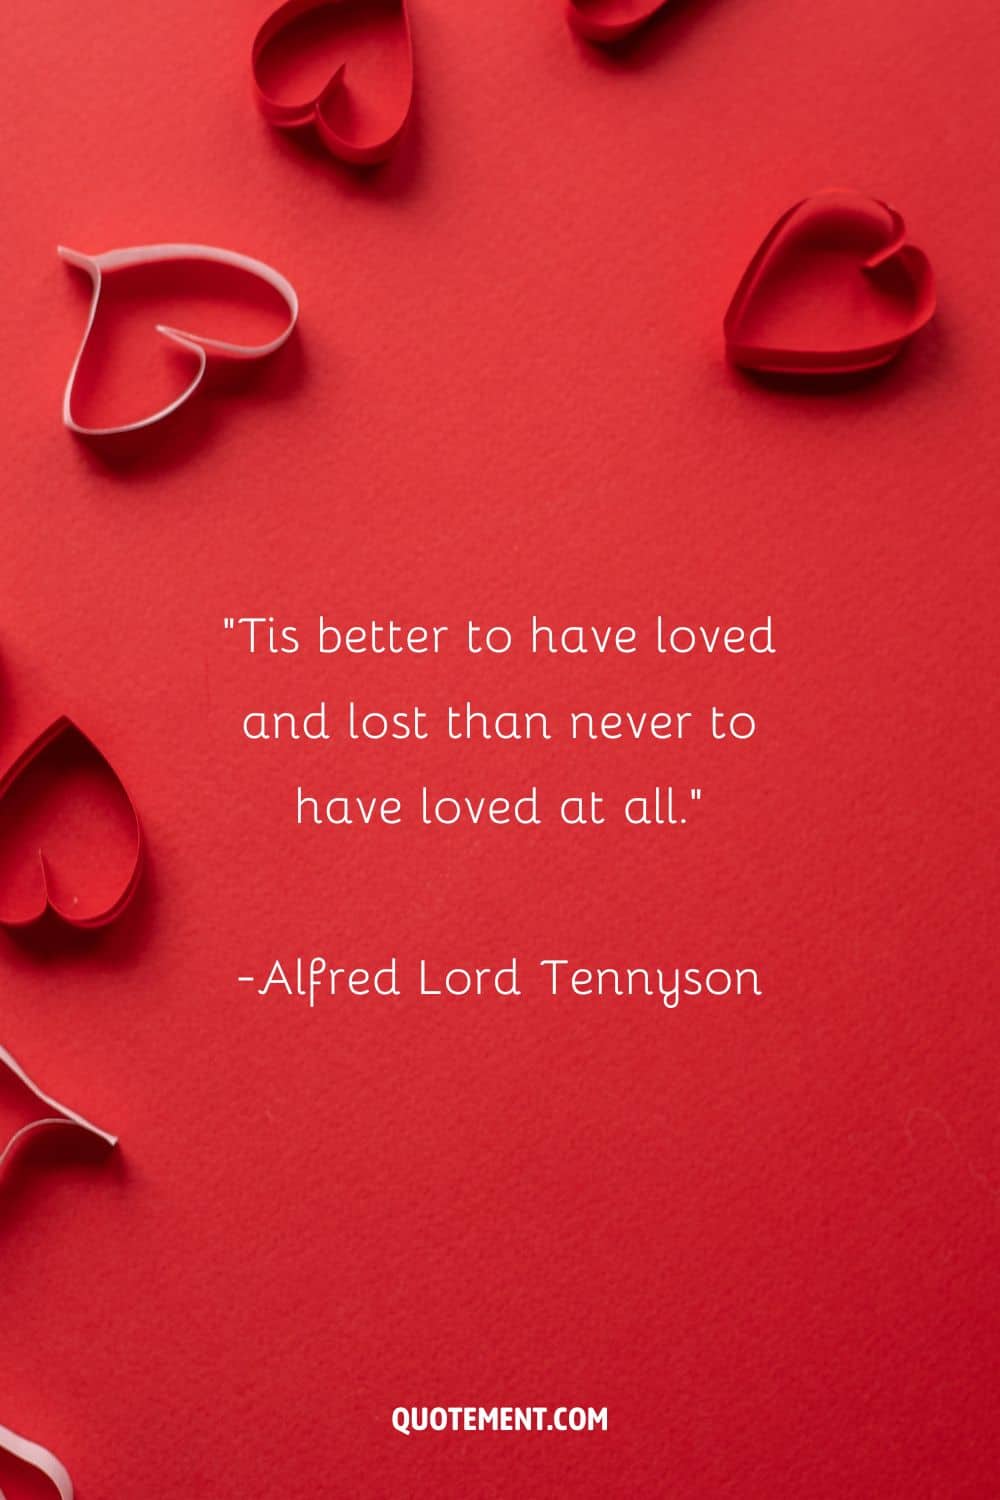 small paper hearts on a red background representing the best quote about love and loss